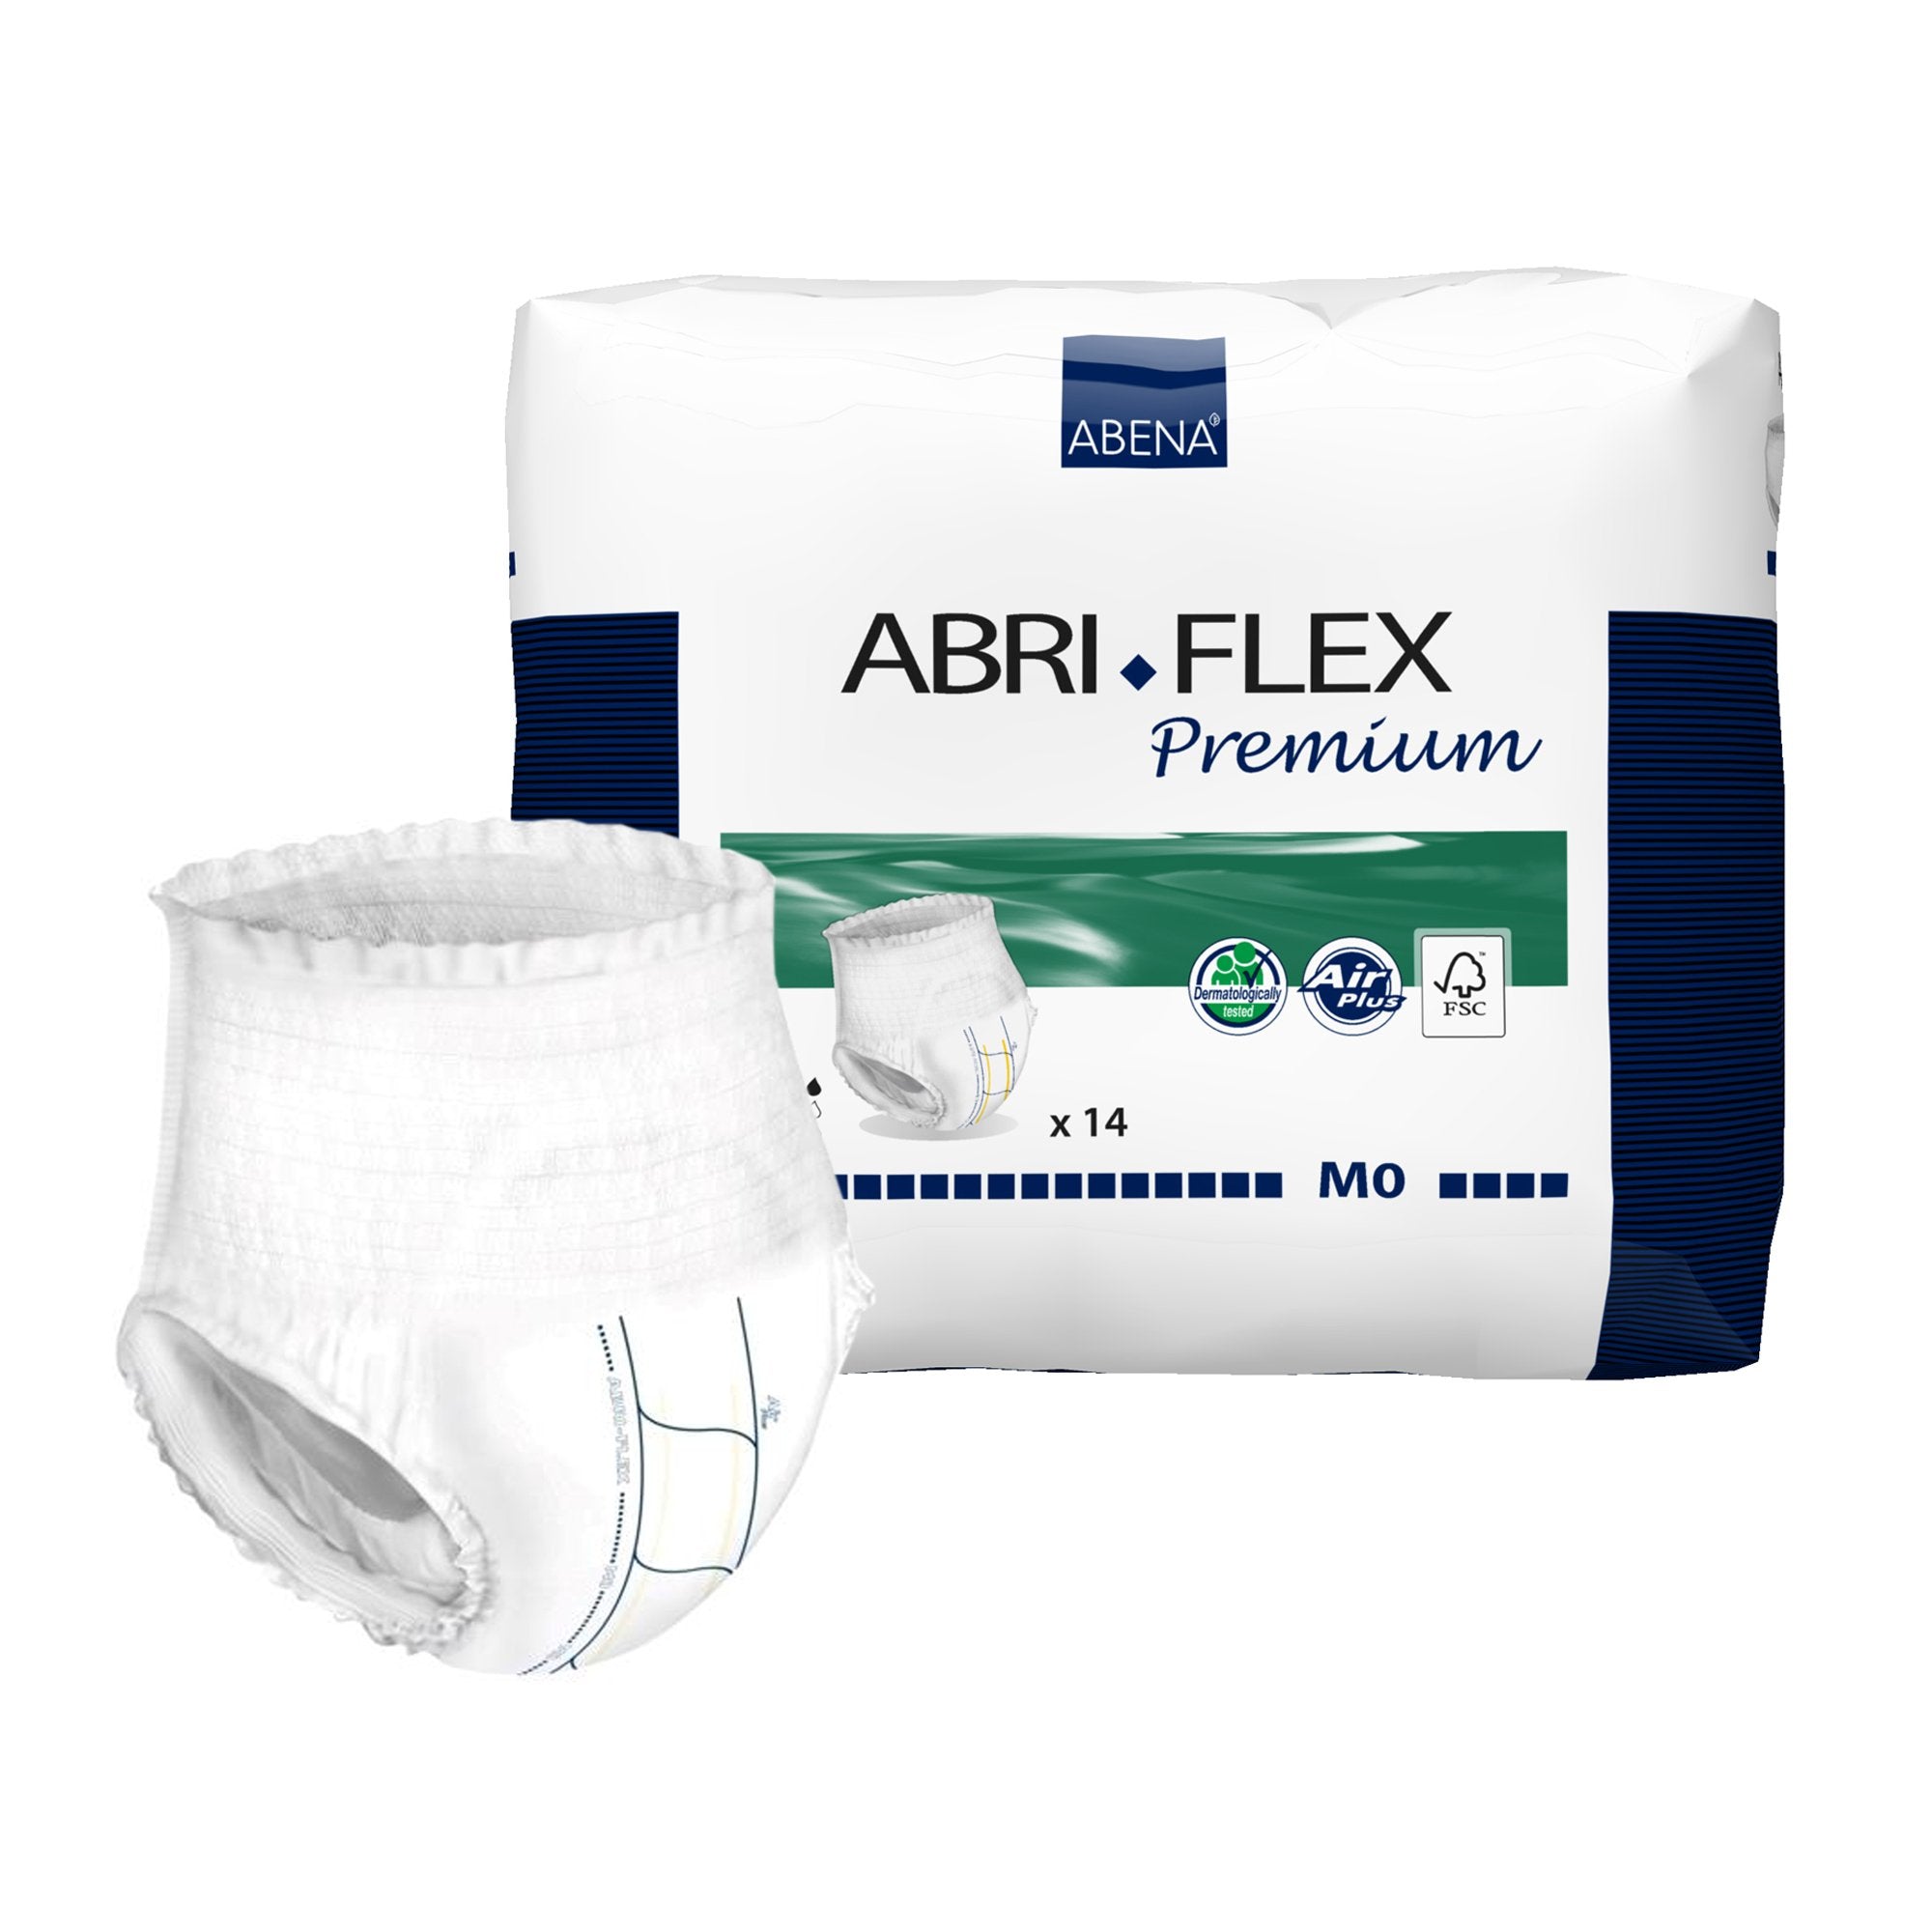 Unisex Adult Absorbent Underwear Abri-Flex™ Premium M0 Pull On with Tear Away Seams Large Disposable Moderate Absorbency